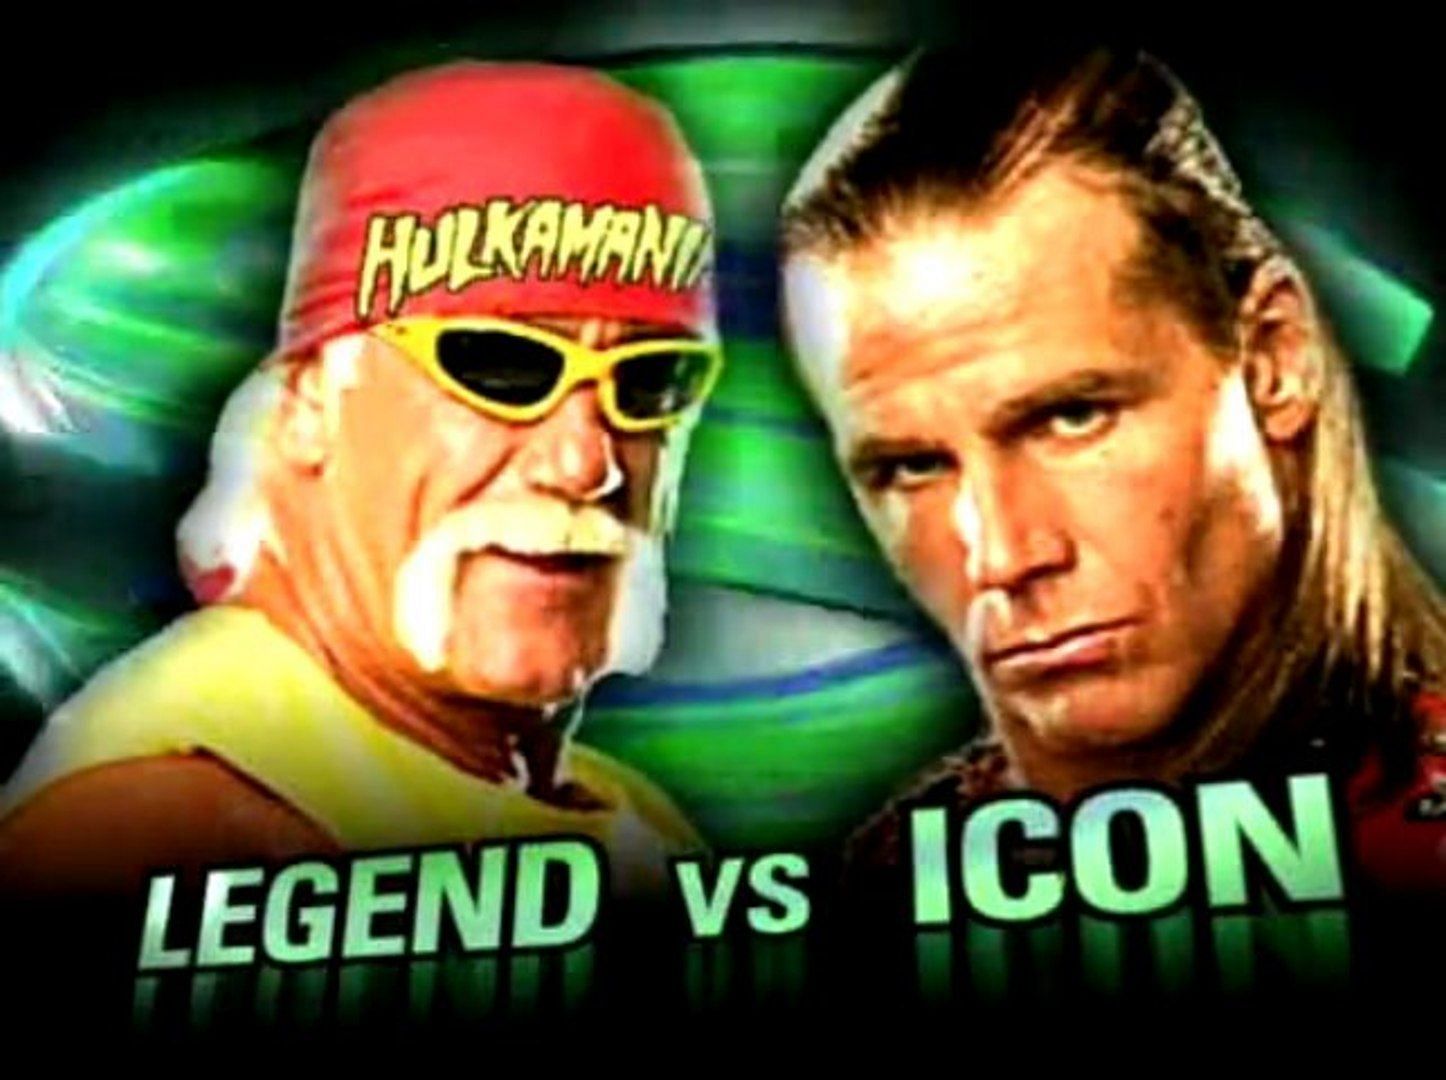 The match was advertised as &#039;Legend vs. Icon&#039;